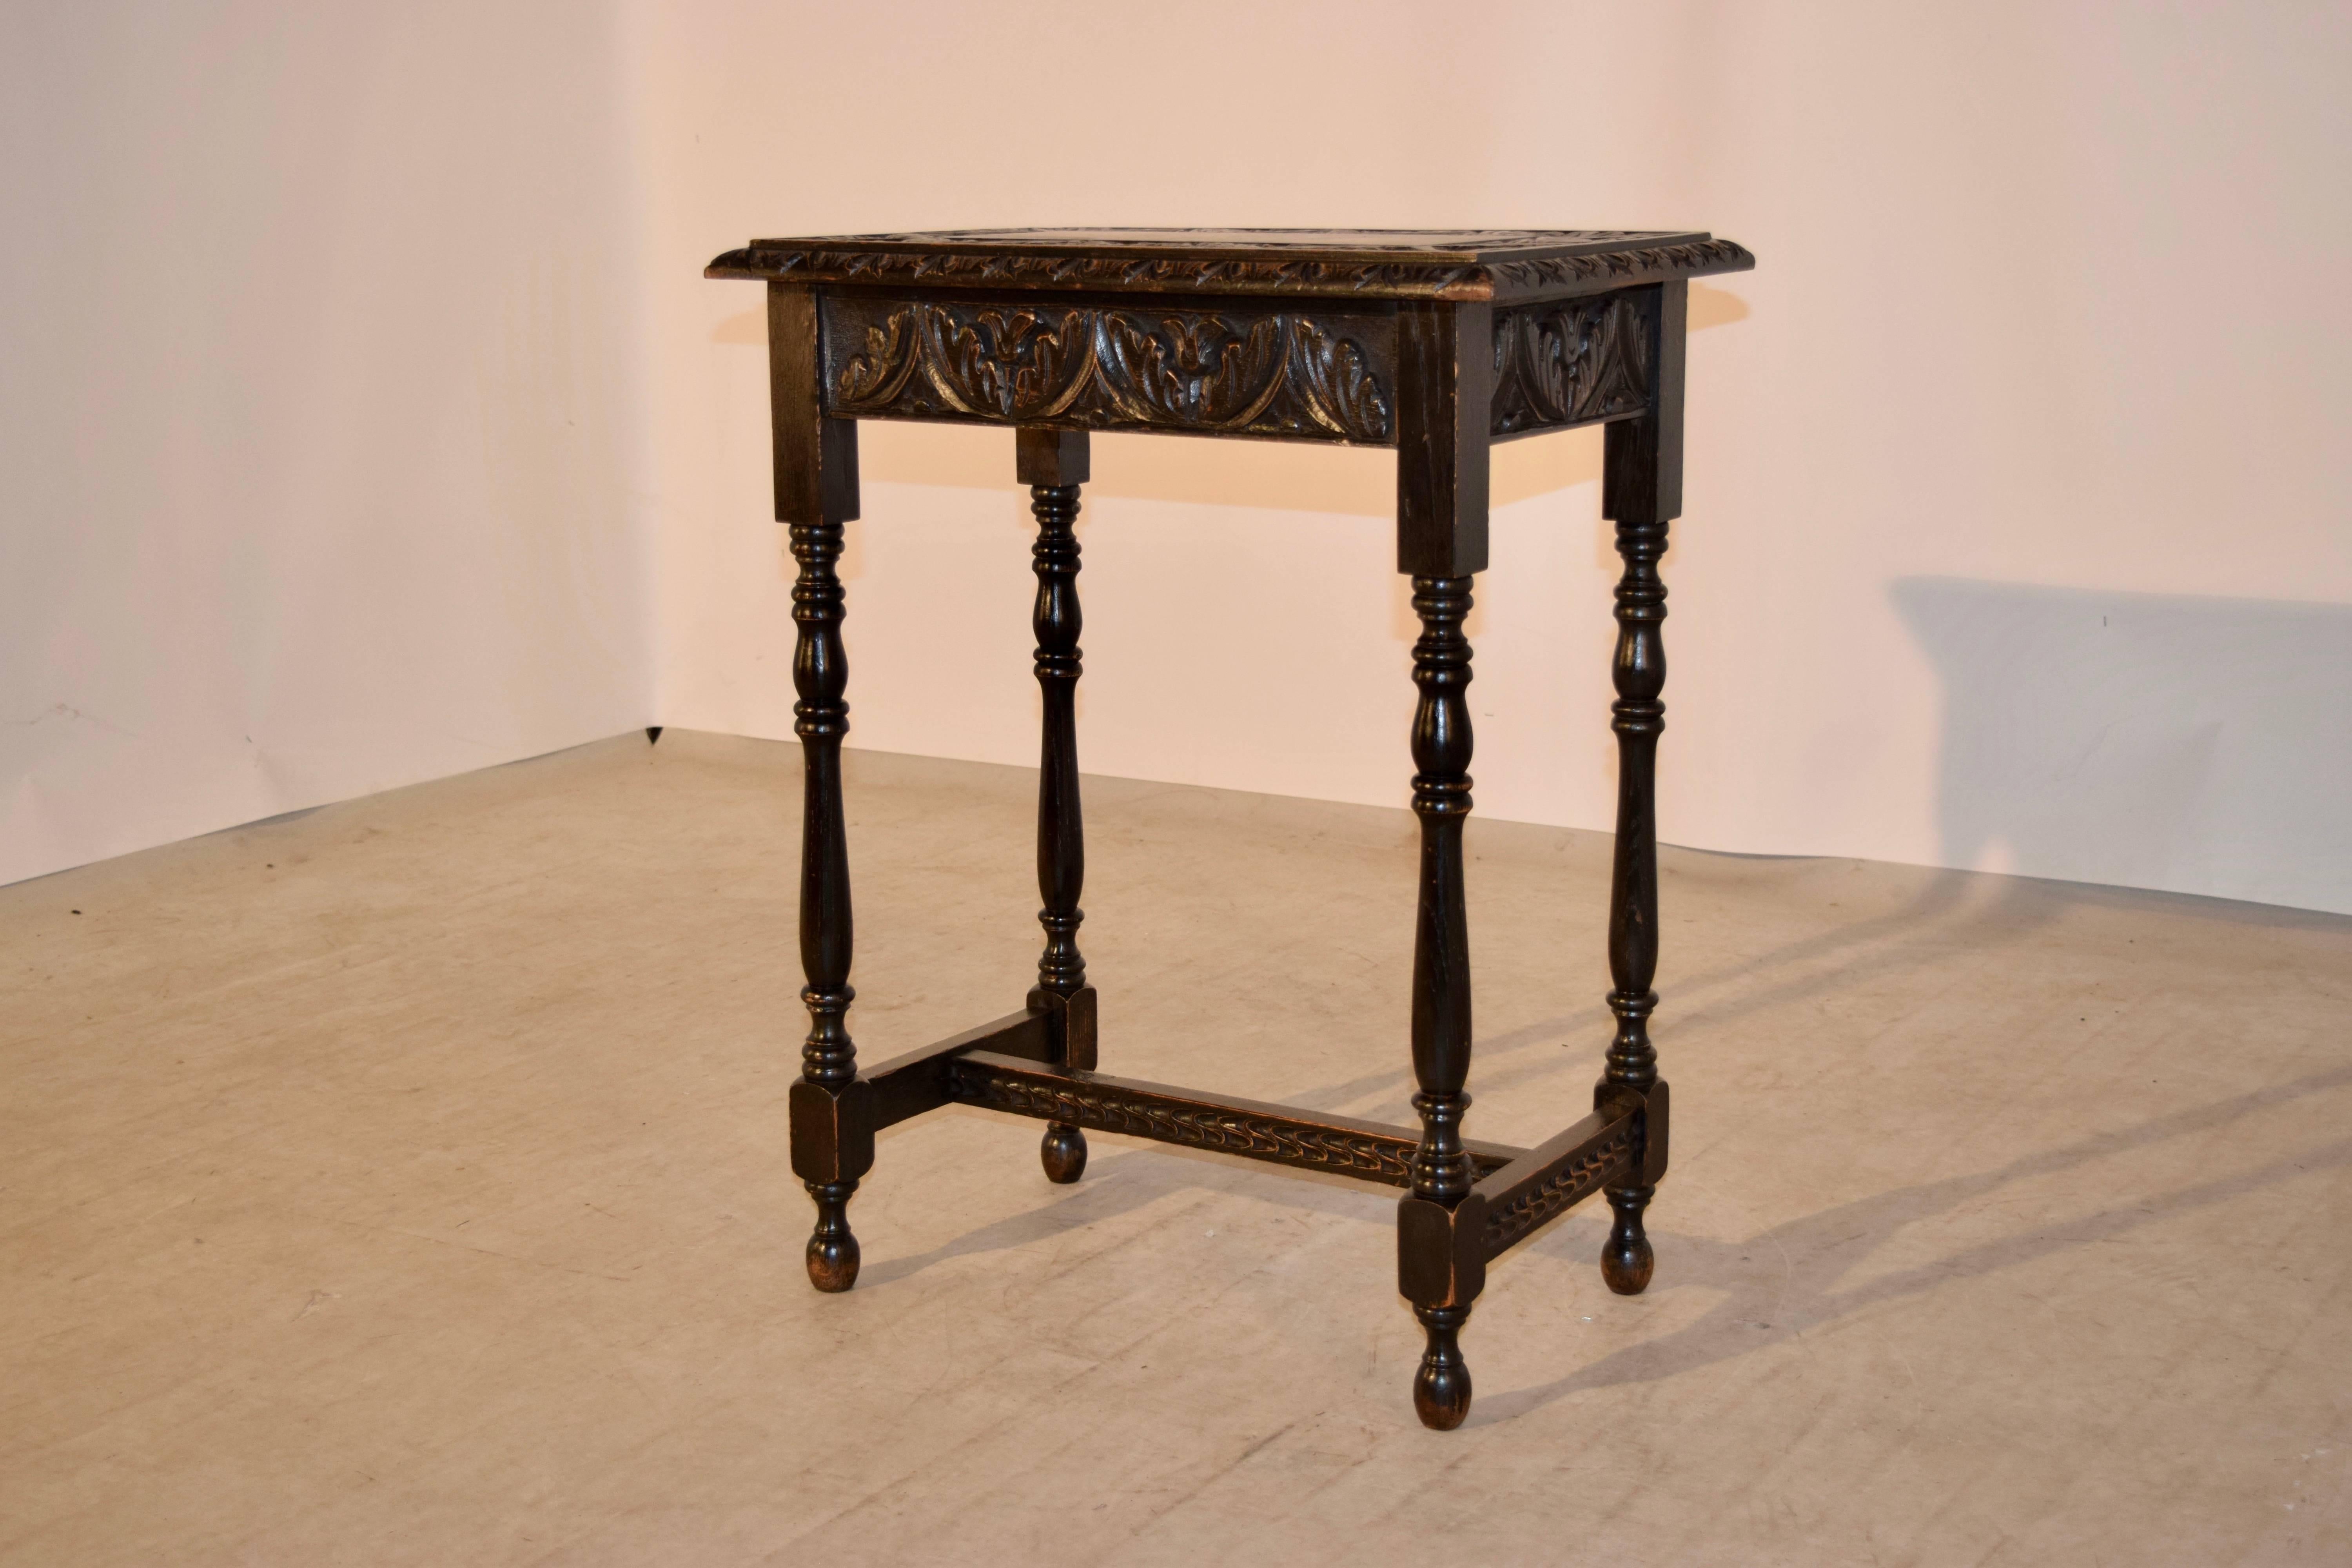 19th century hand-carved oak side table from England. The top is banded with hand-carved designs and has a bevelled and gadrooned molded edge, following down to a hand-carved apron. The legs are hand-turned and are joined by cross stretchers, which